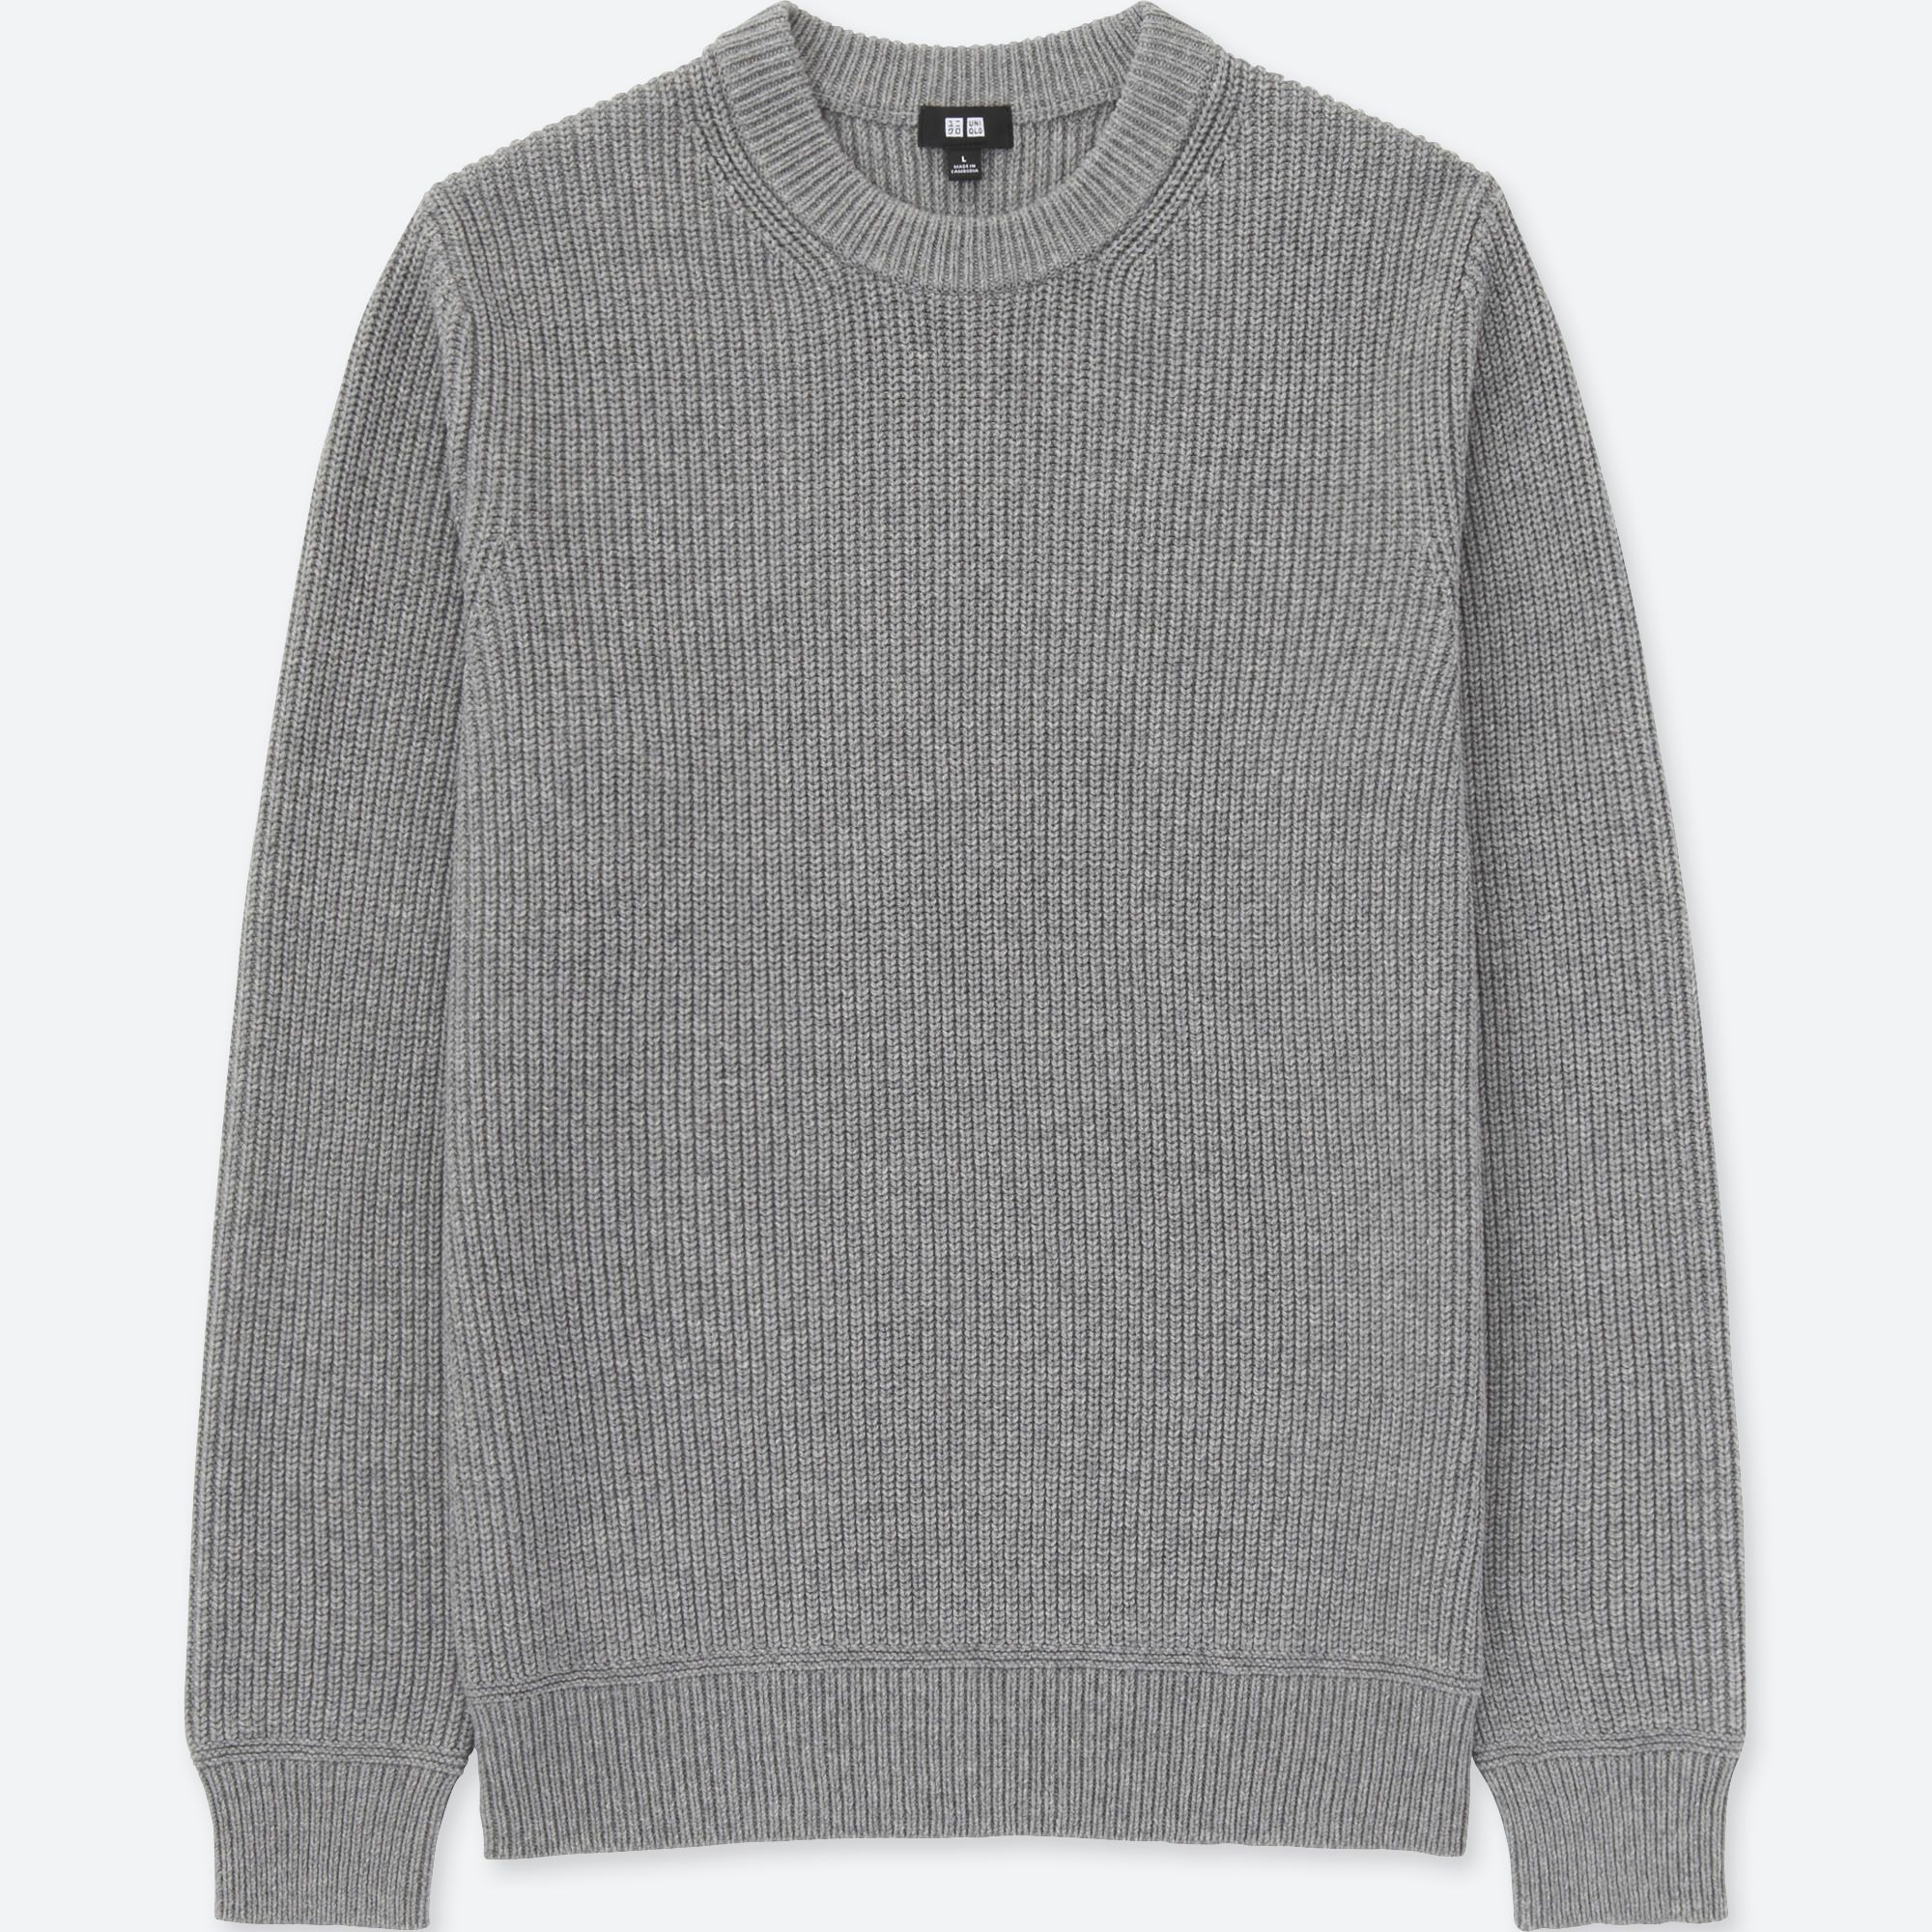 Giordano Men Knitwear Fashion Ribbed Knitted Sweater Long